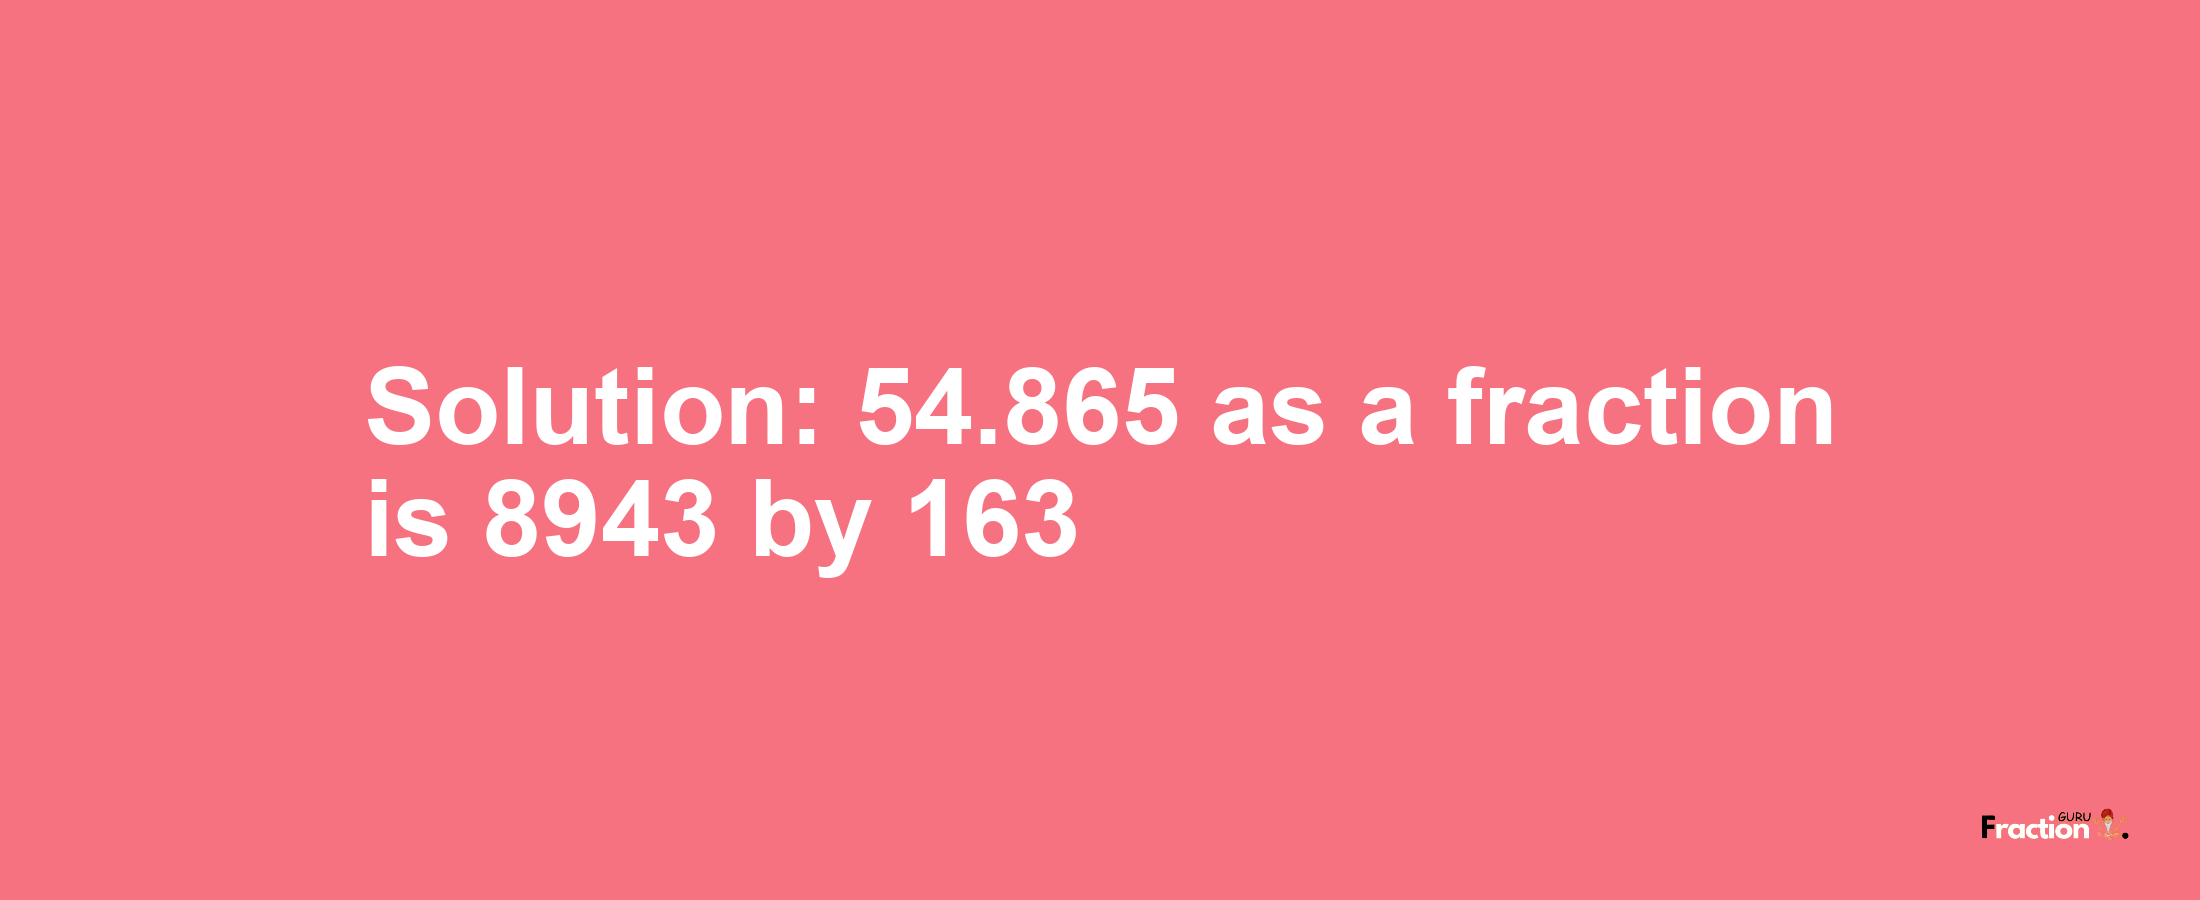 Solution:54.865 as a fraction is 8943/163